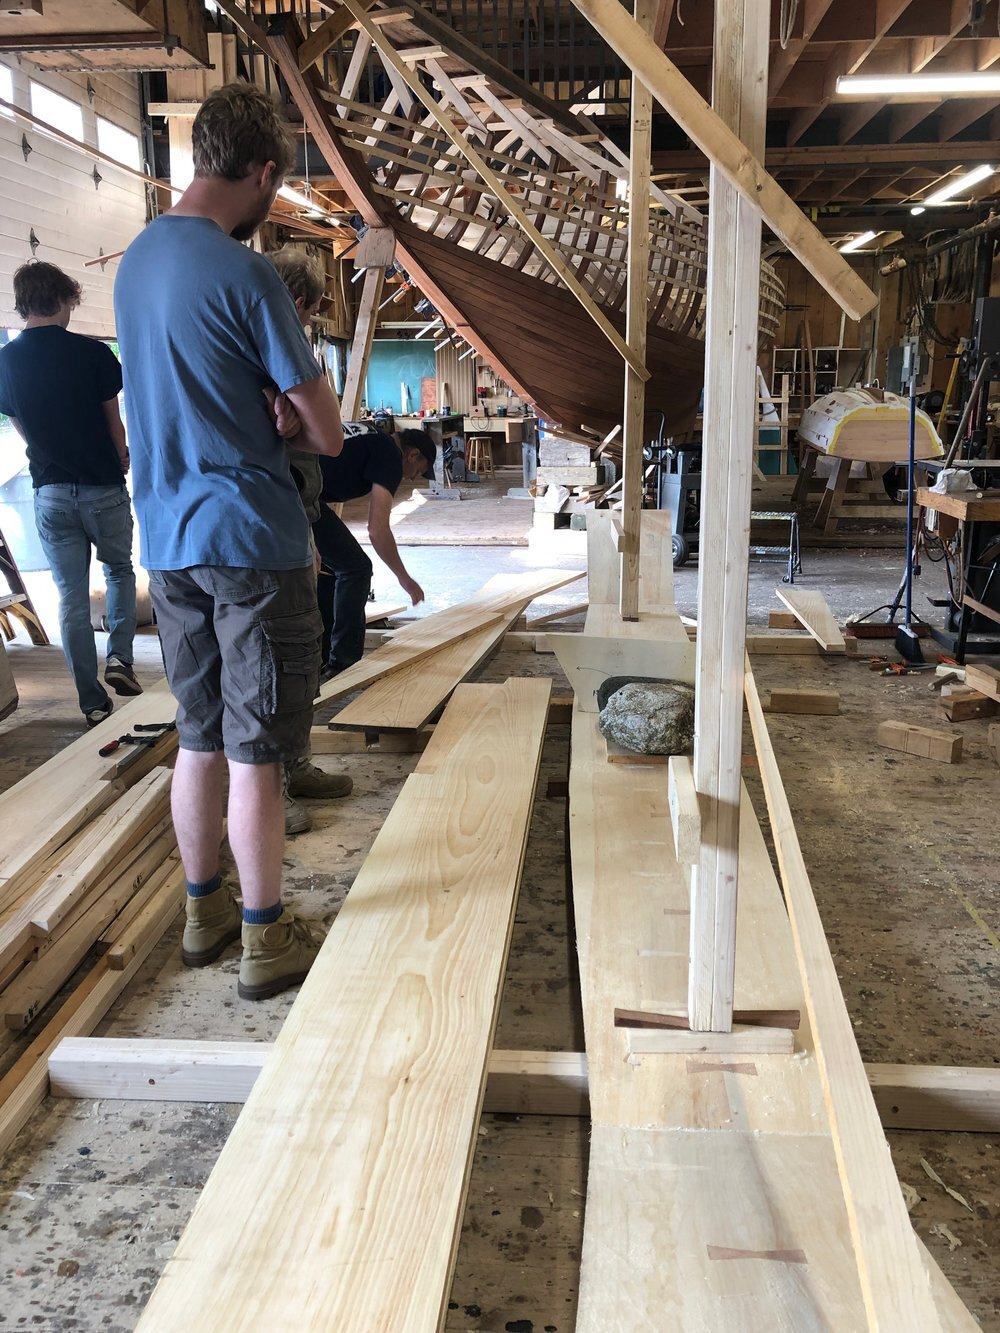  Once the bottom planks are nailed together, they are propped in place and weighted down with rocks. Work can begin on the side planks now. 